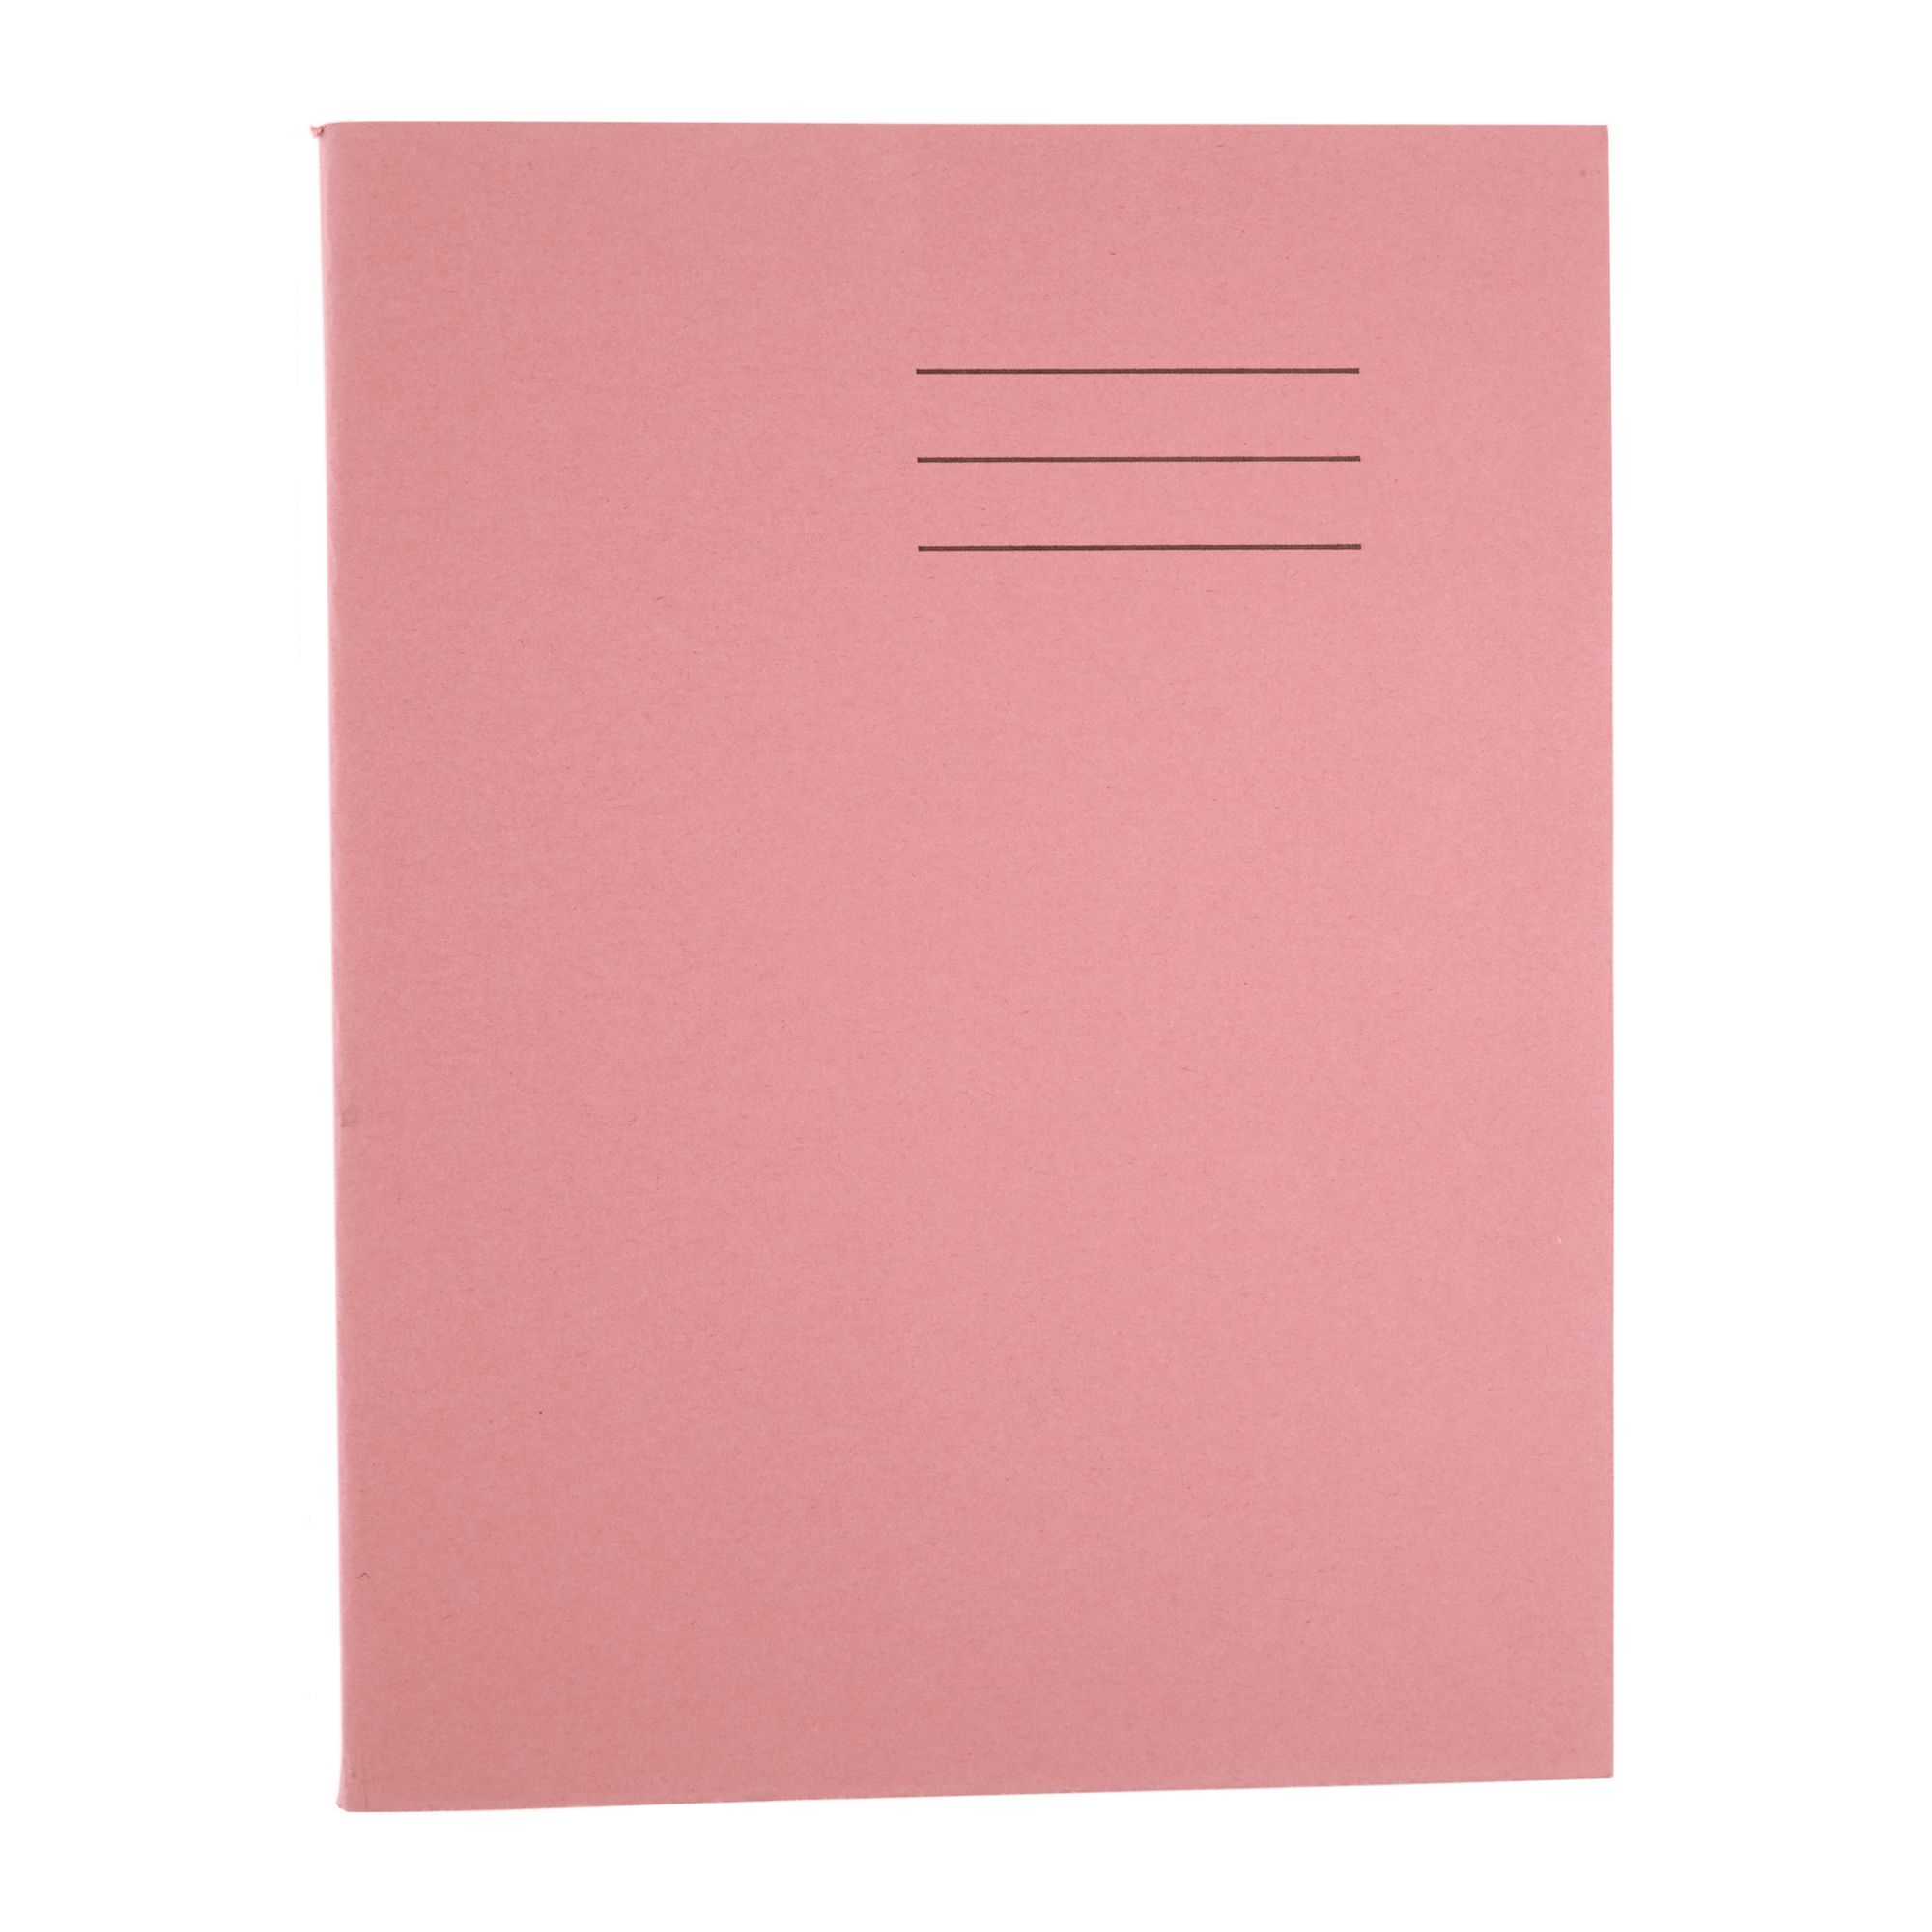 Classmates Pink 8x6.5" 32 page Plain Exercise Book - Pack of 100